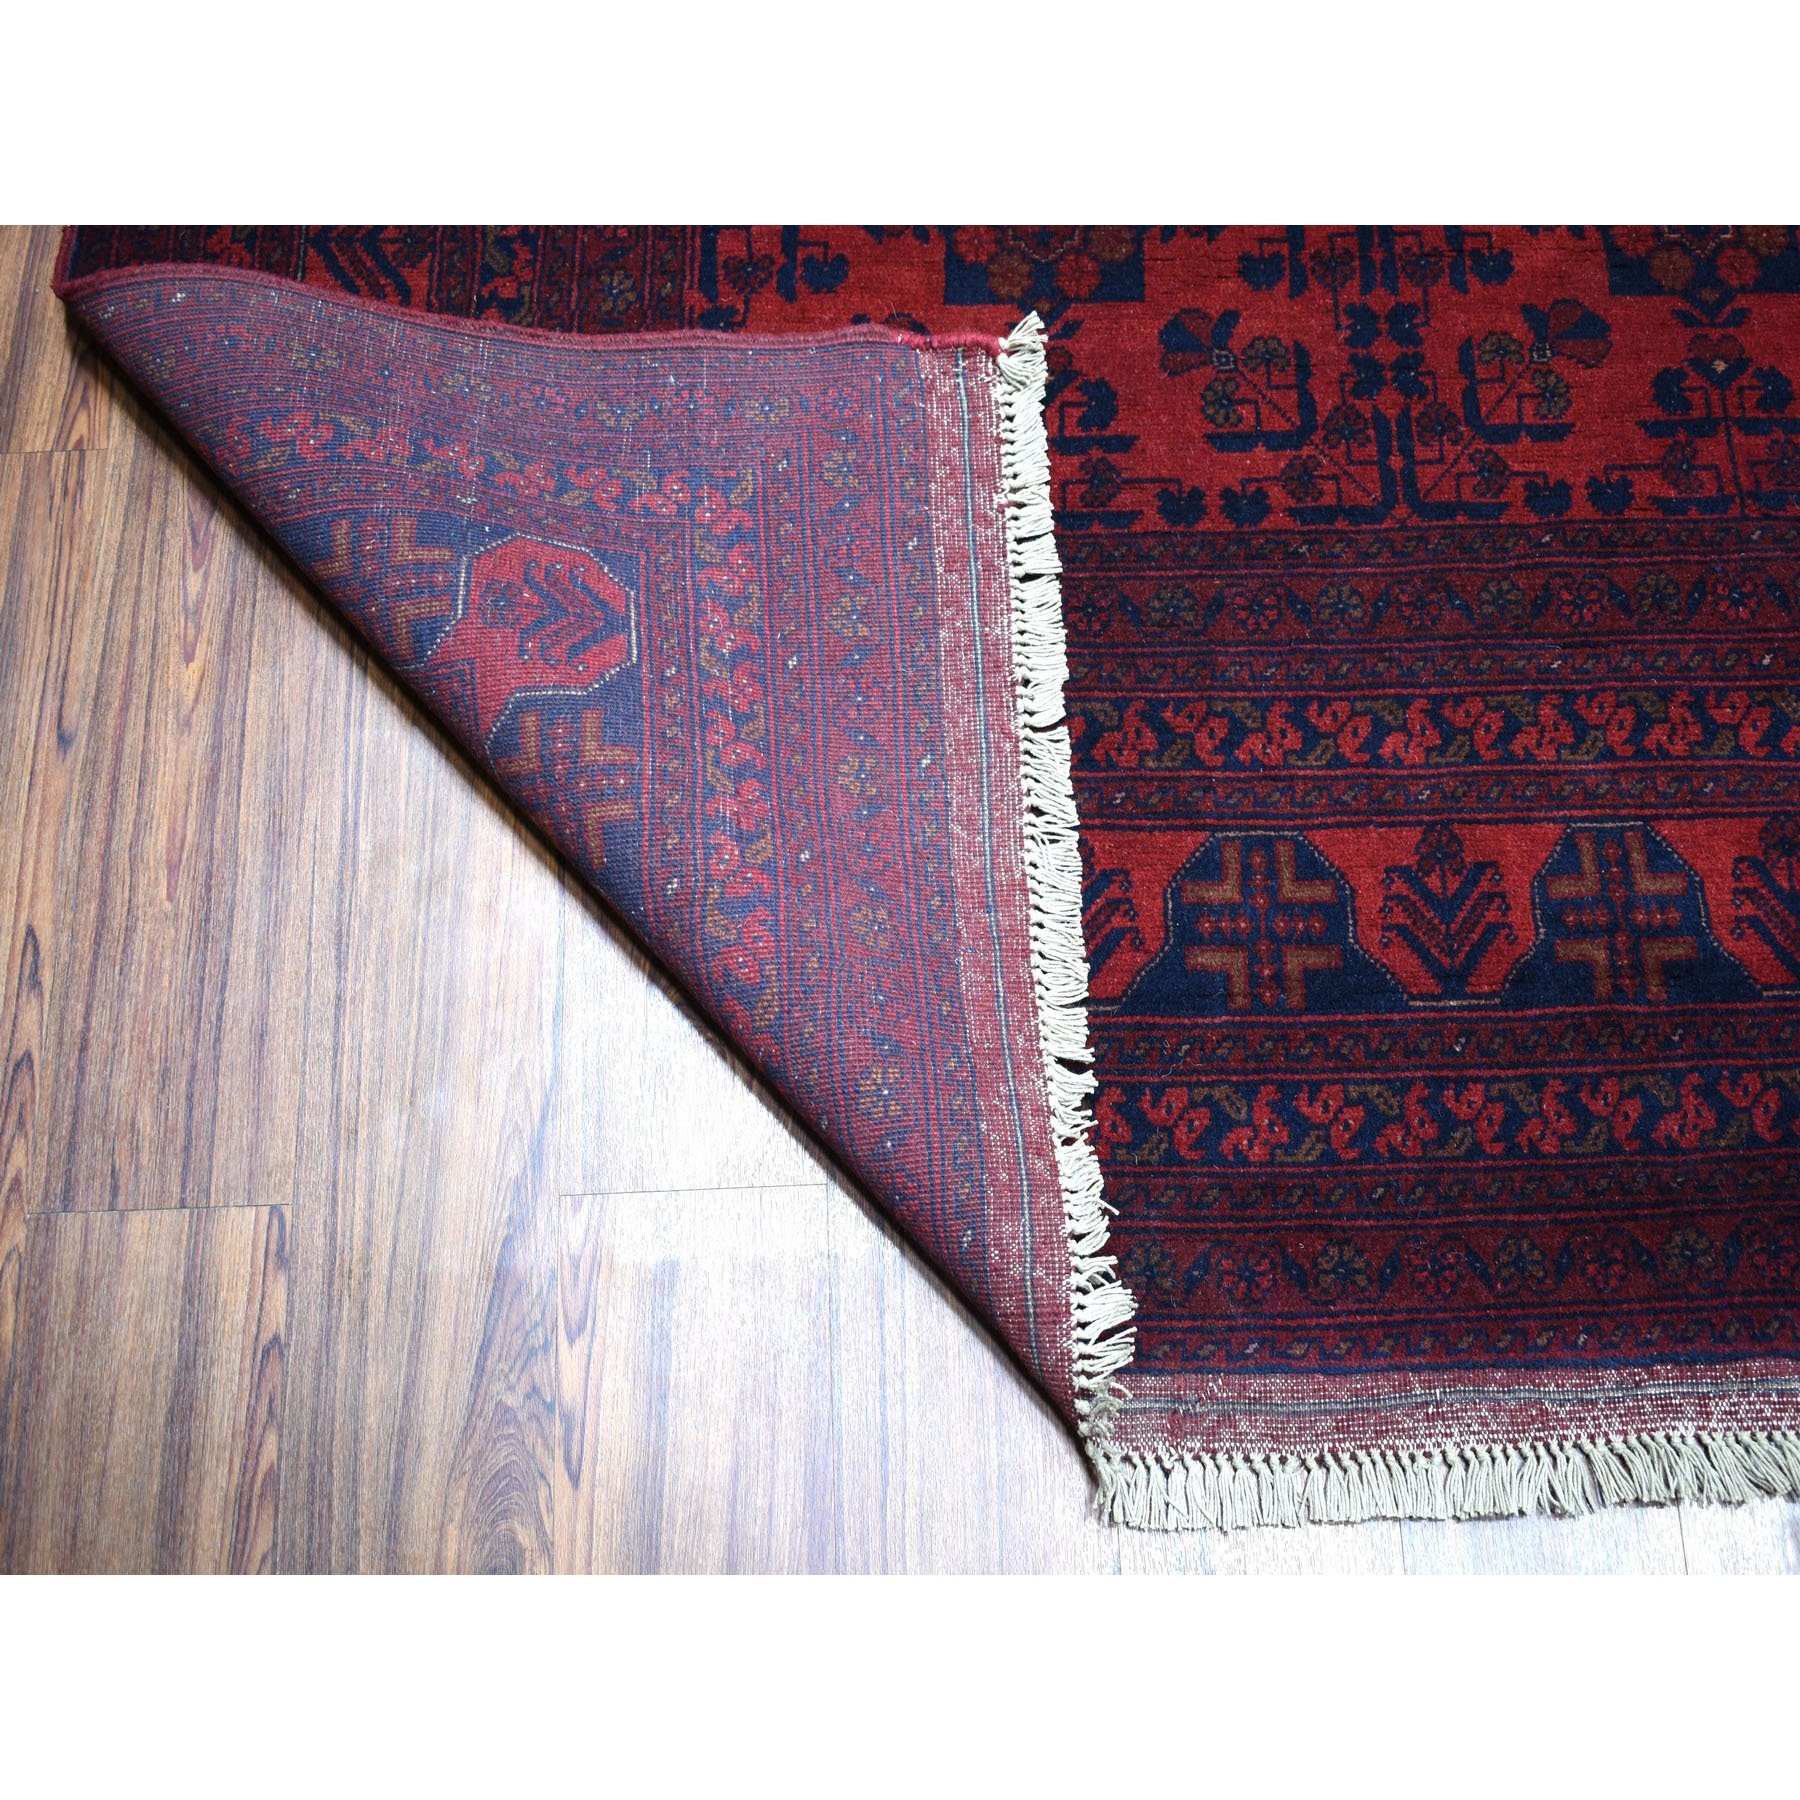 10-x12-7  Vintage Look Red Geometric Design Afghan Andkhoy Pure Wool Hand-Knotted Oriental Rug 